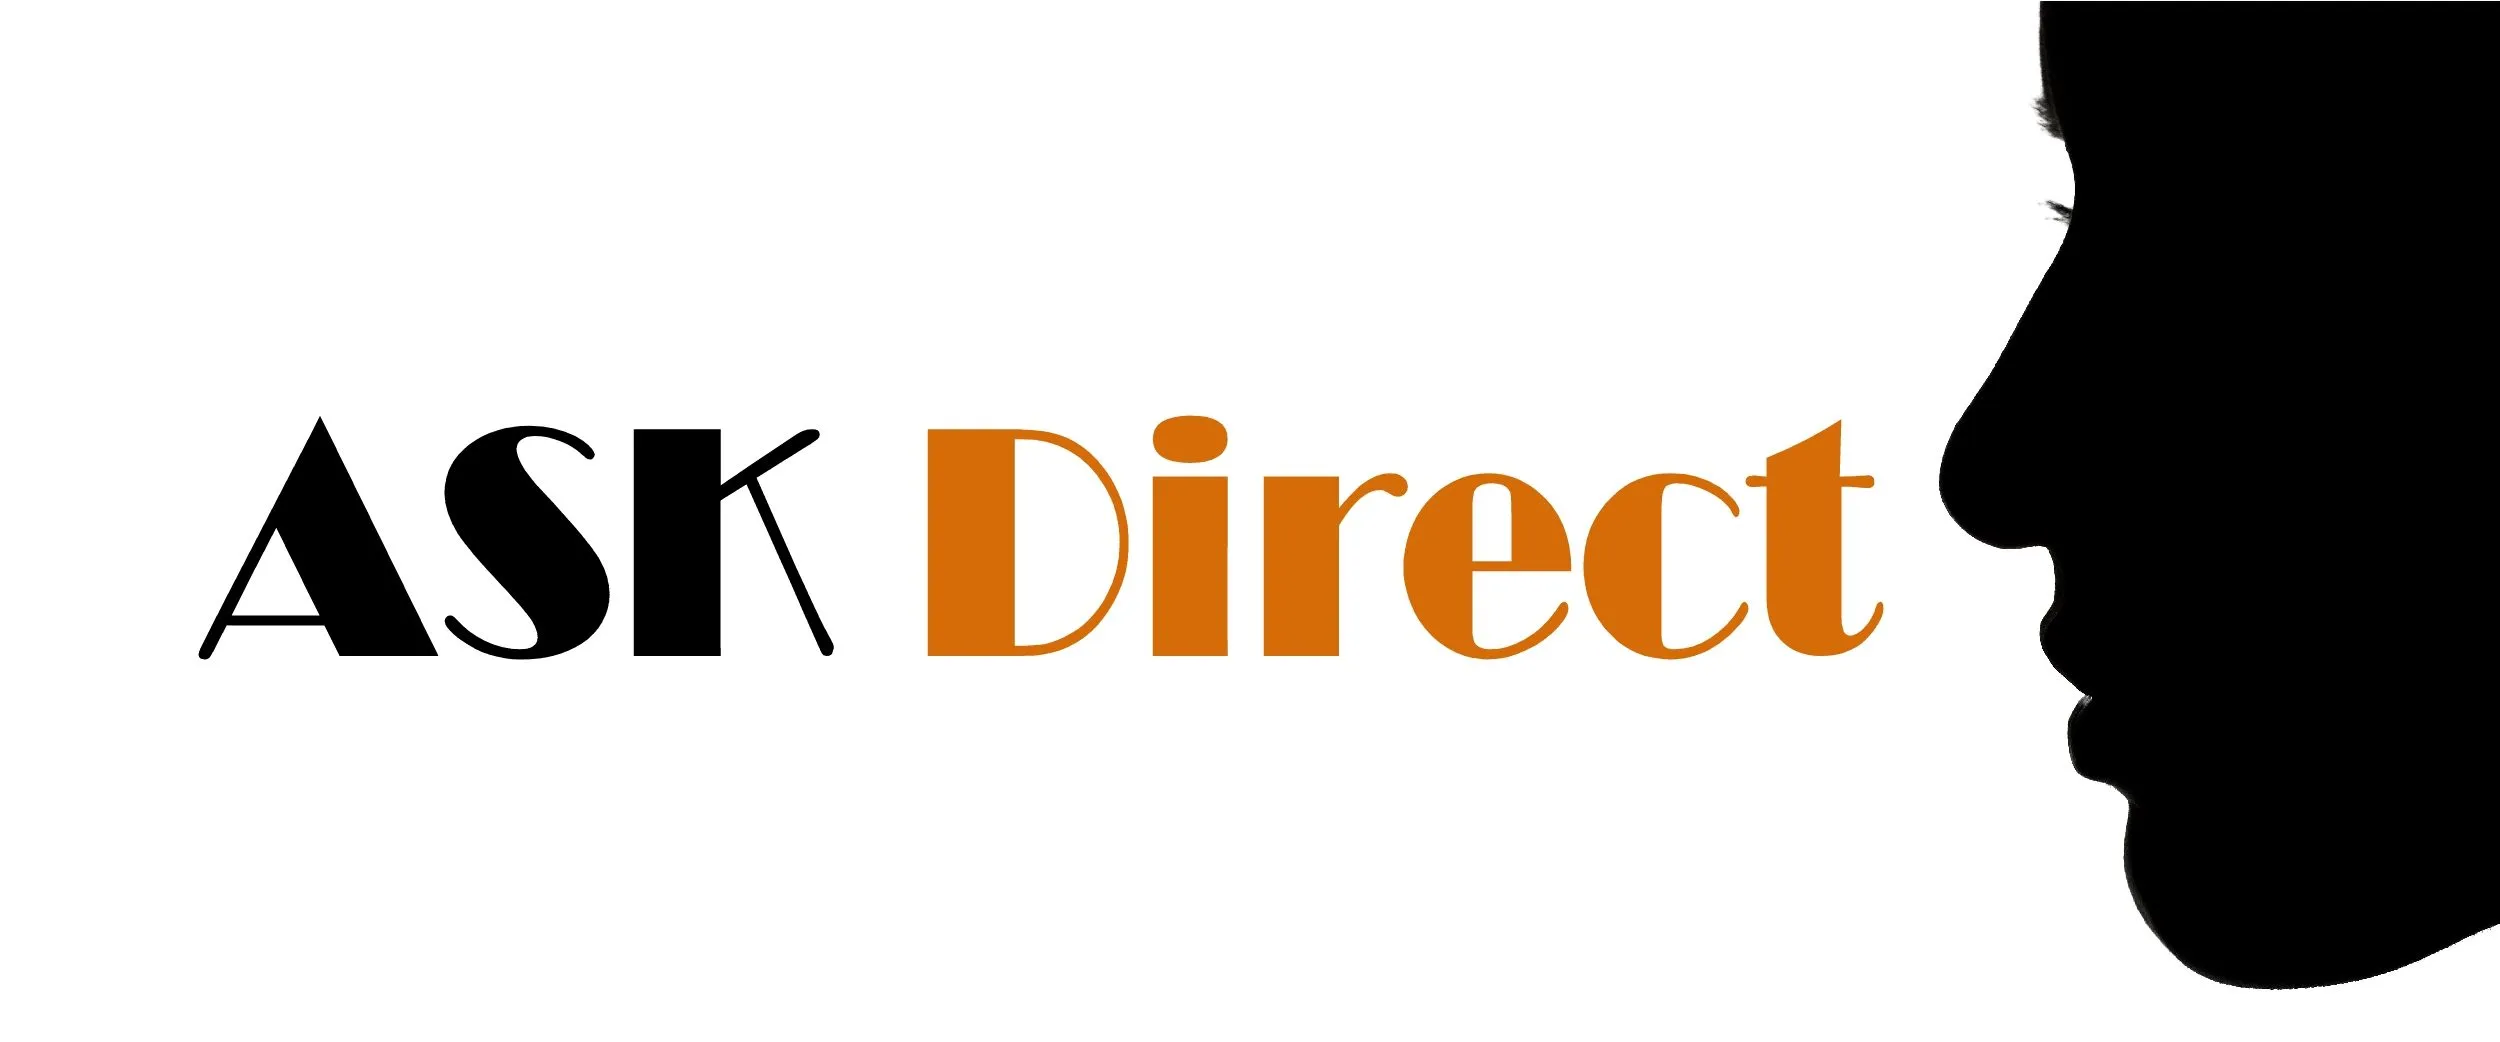 ASK Direct